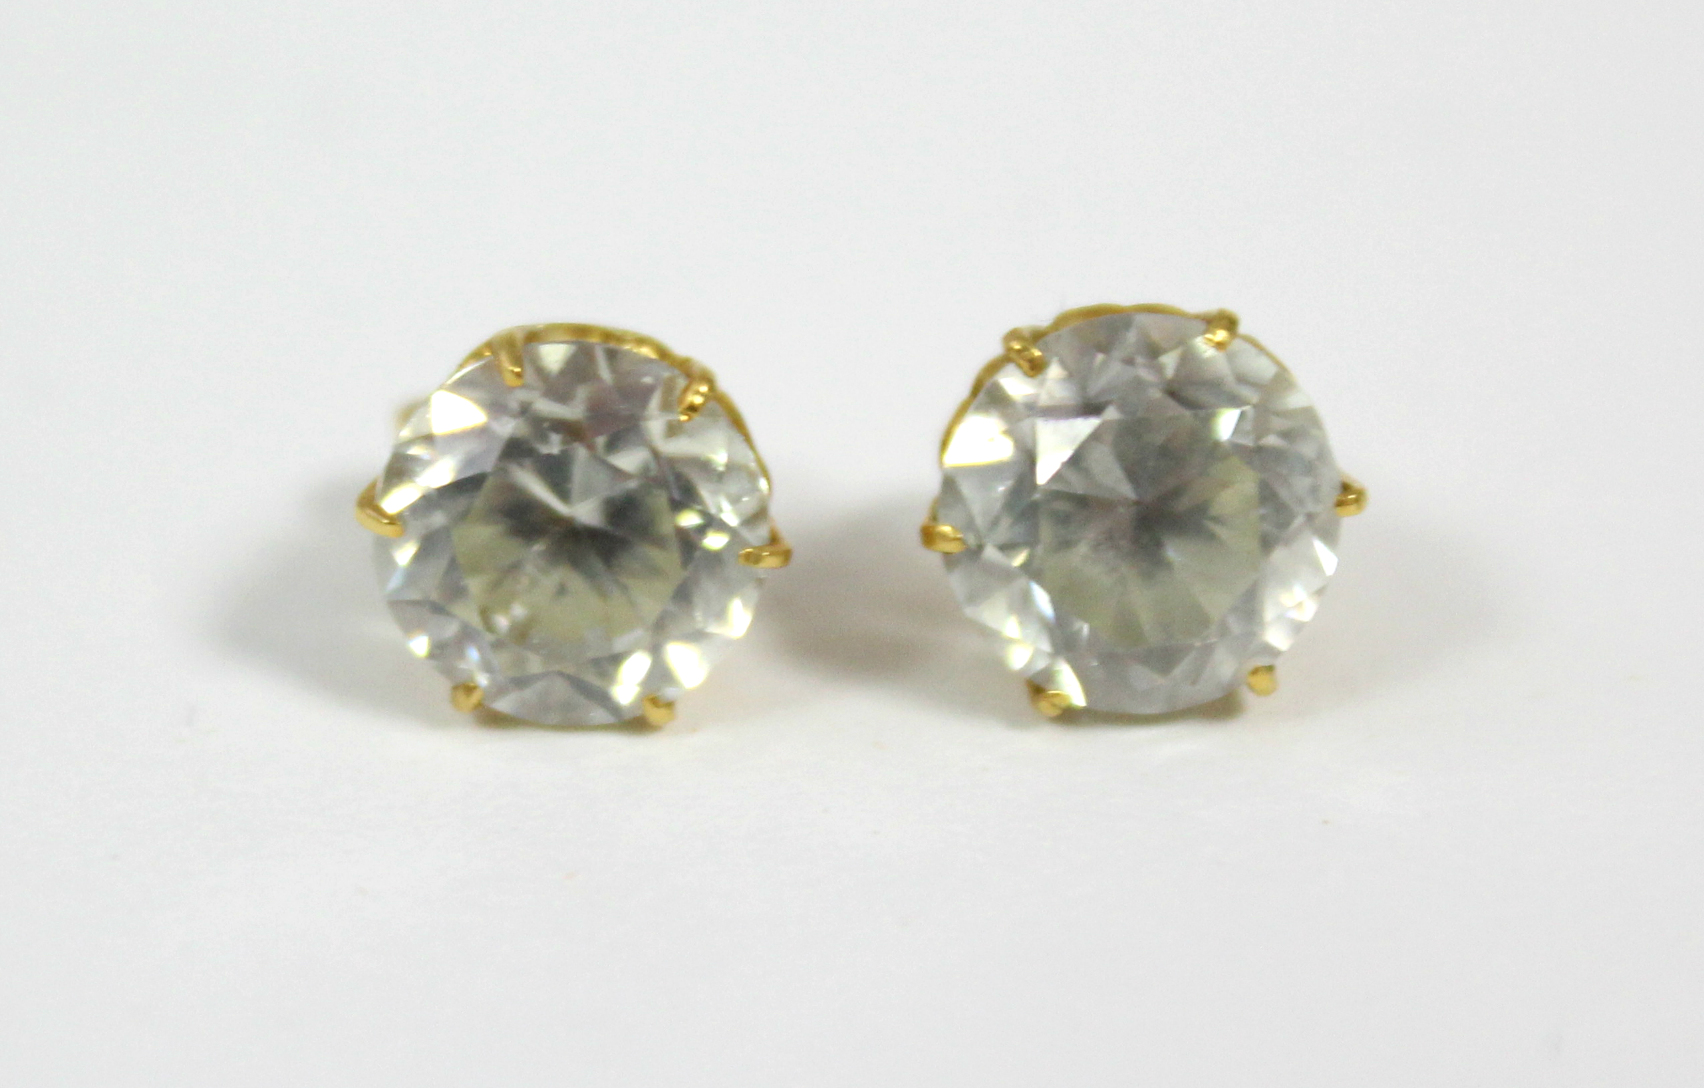 A pair of white topaz ear studs. - Image 2 of 3